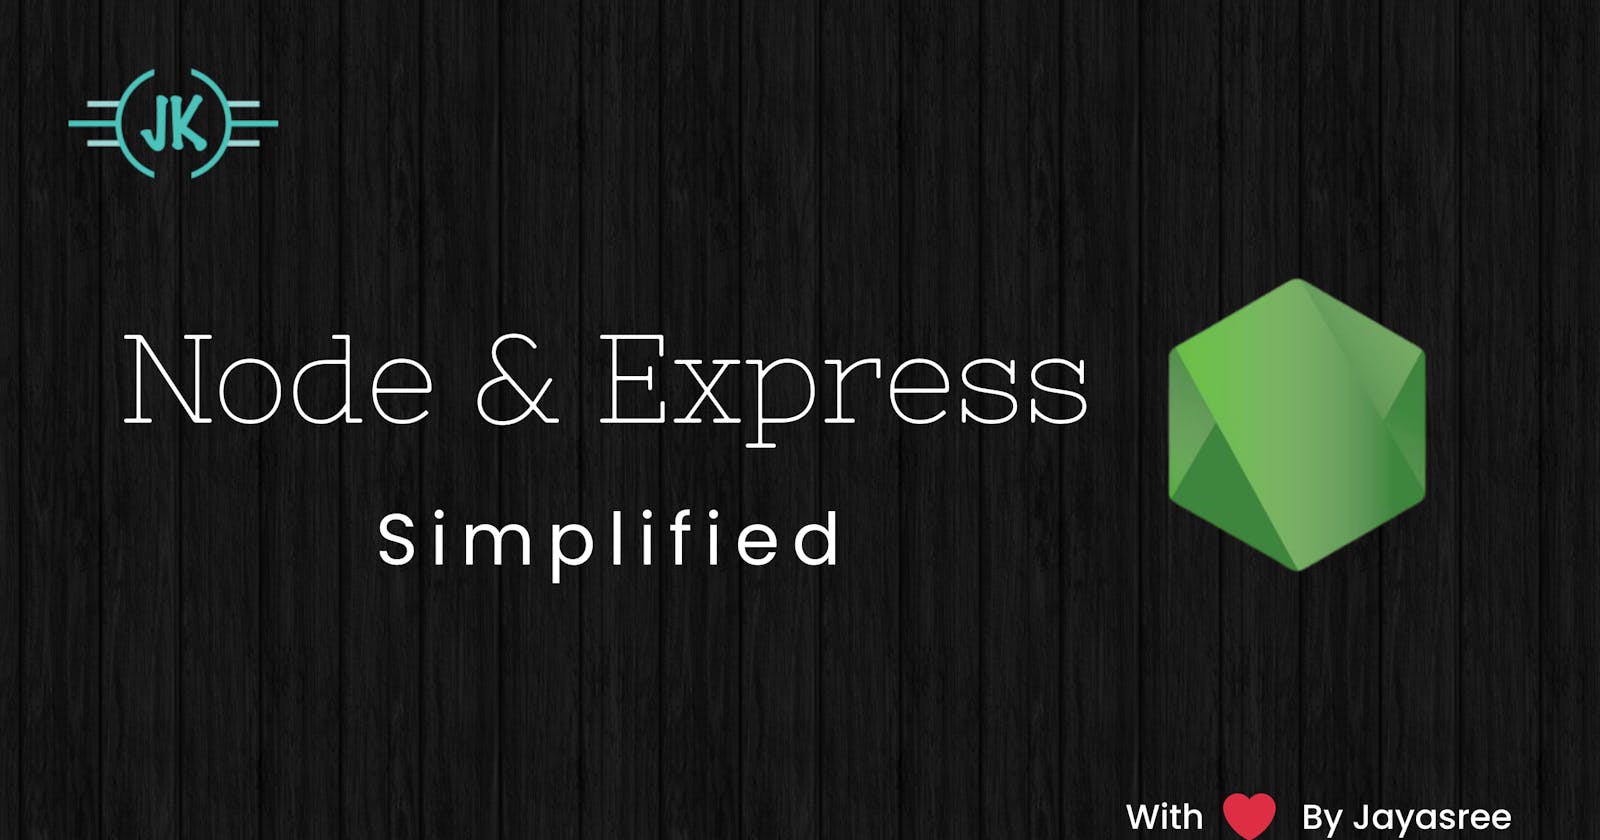 Node and Express simplified